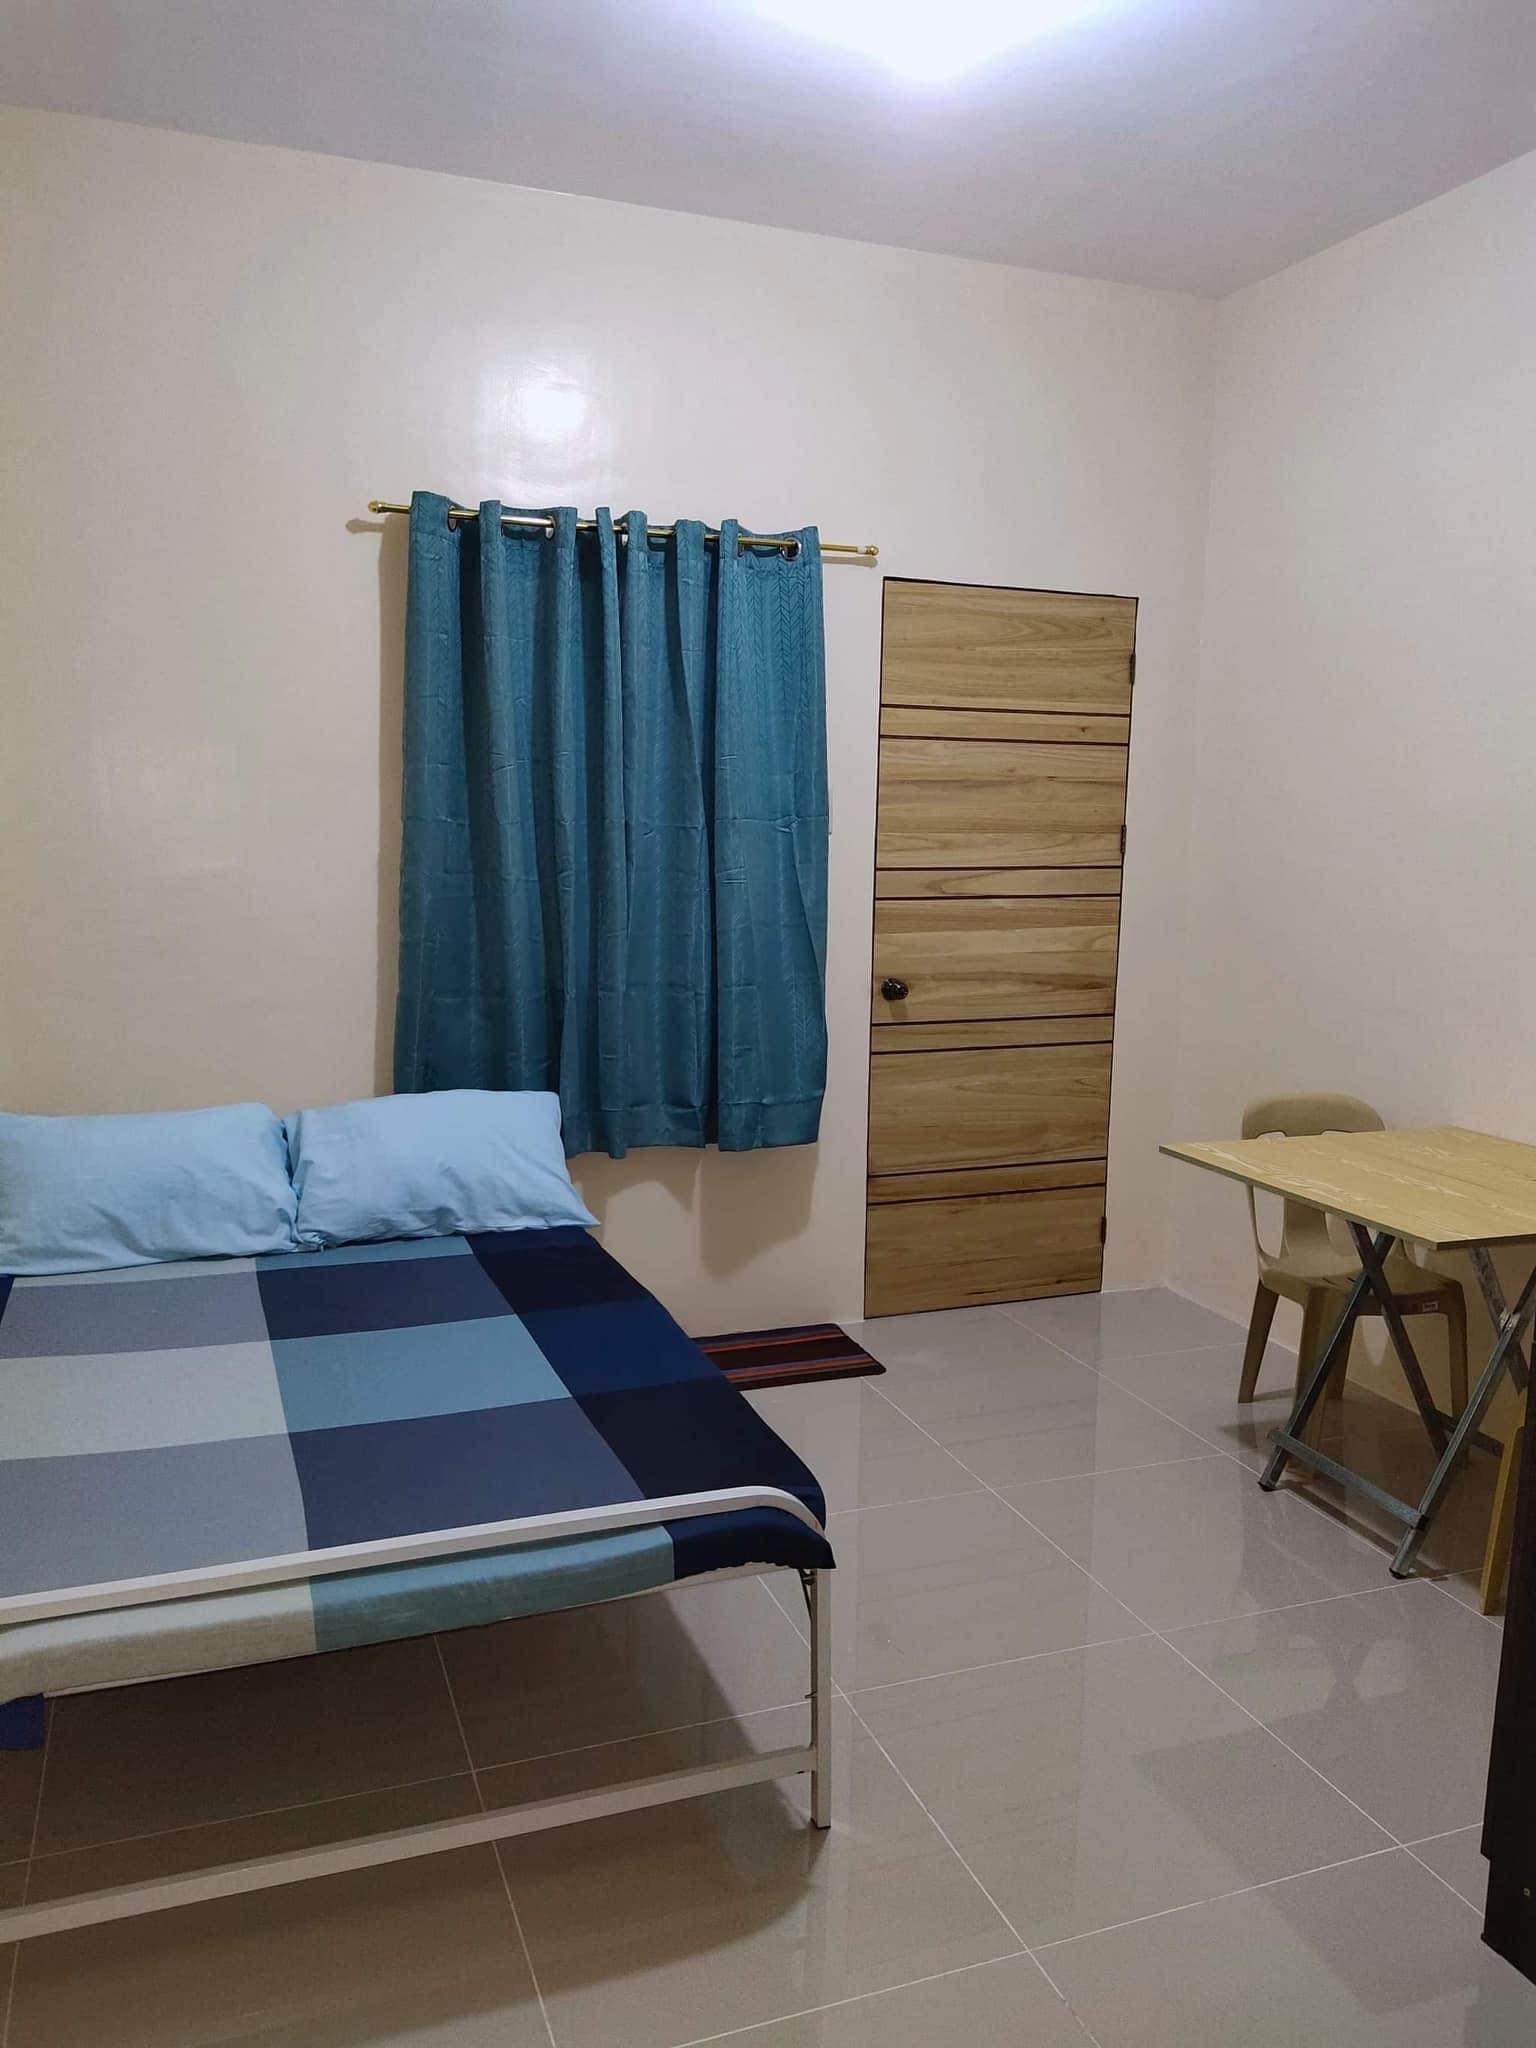 Room for rent in davao city 2000